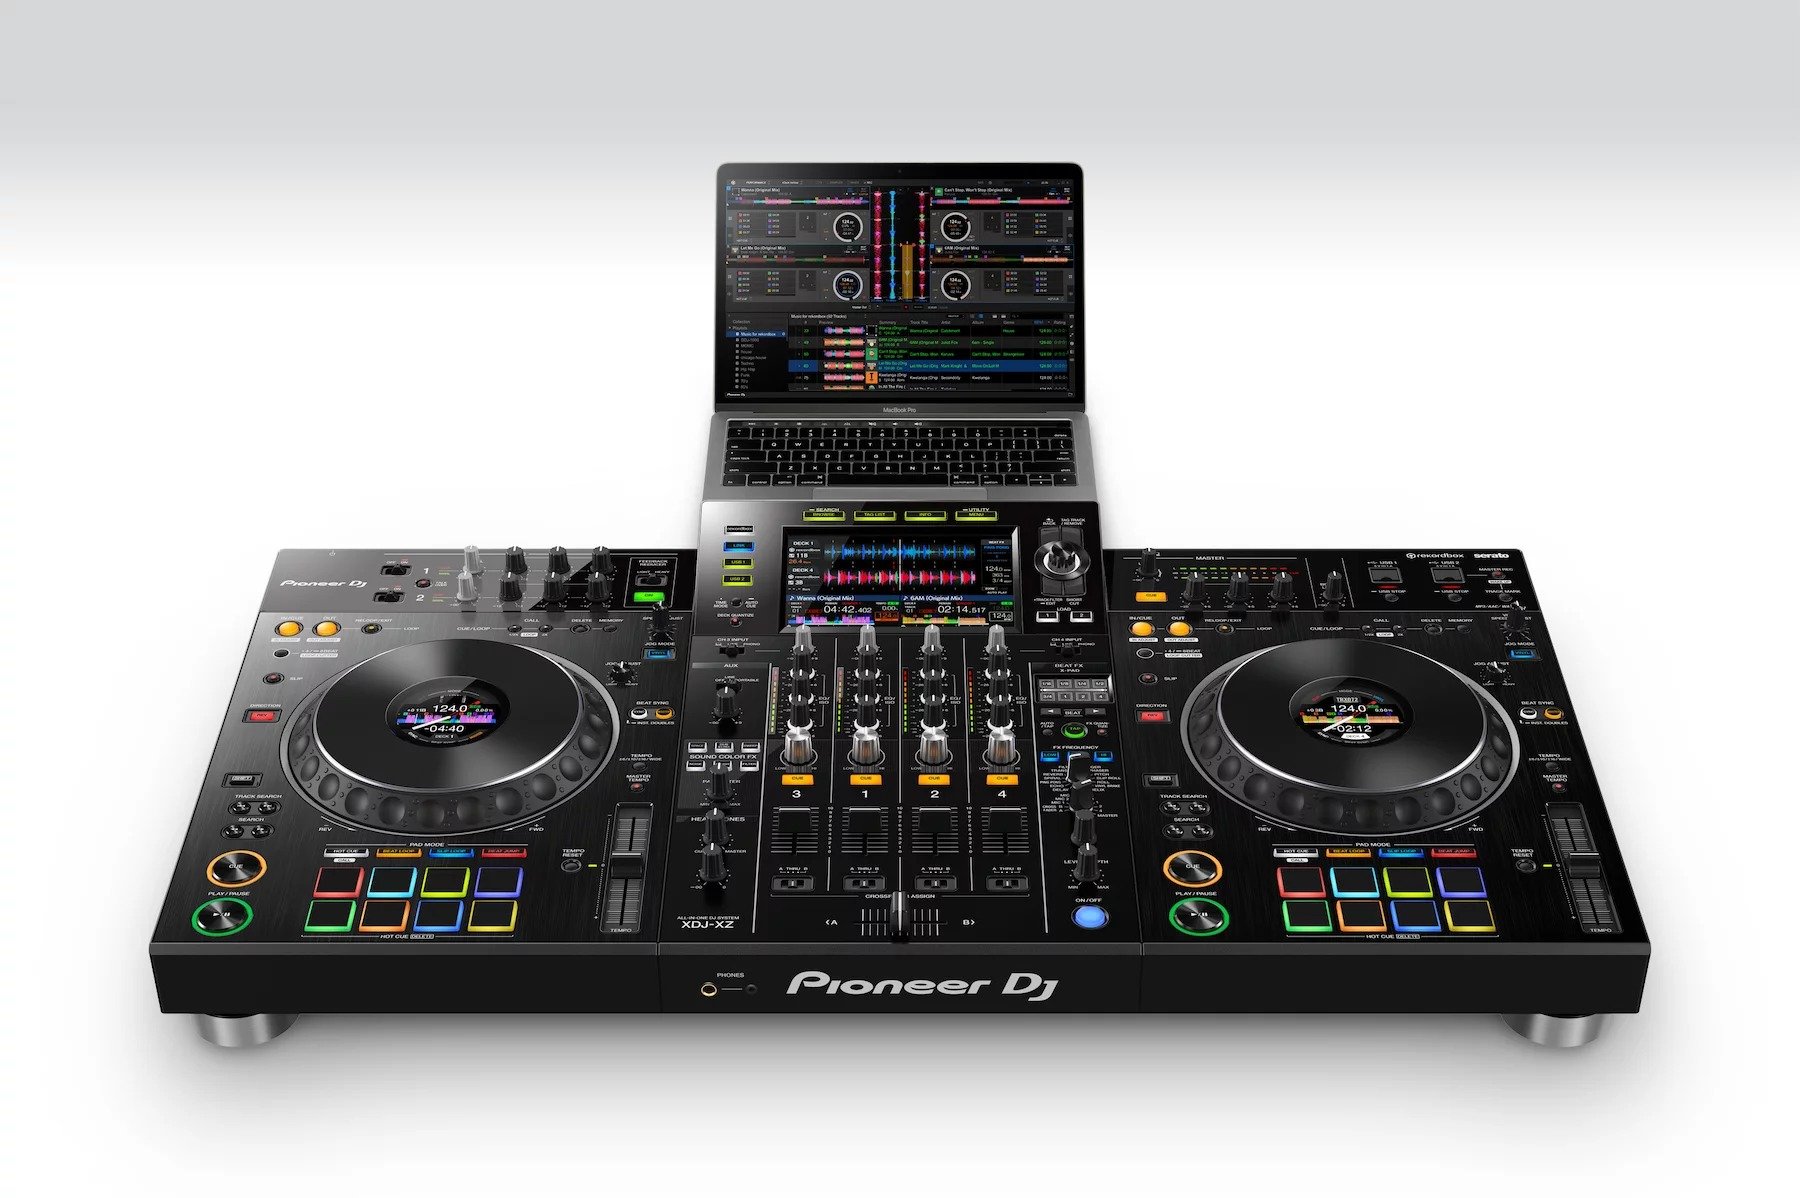 Differences between the Pioneer XDJ-XZ and the DDJ-1000